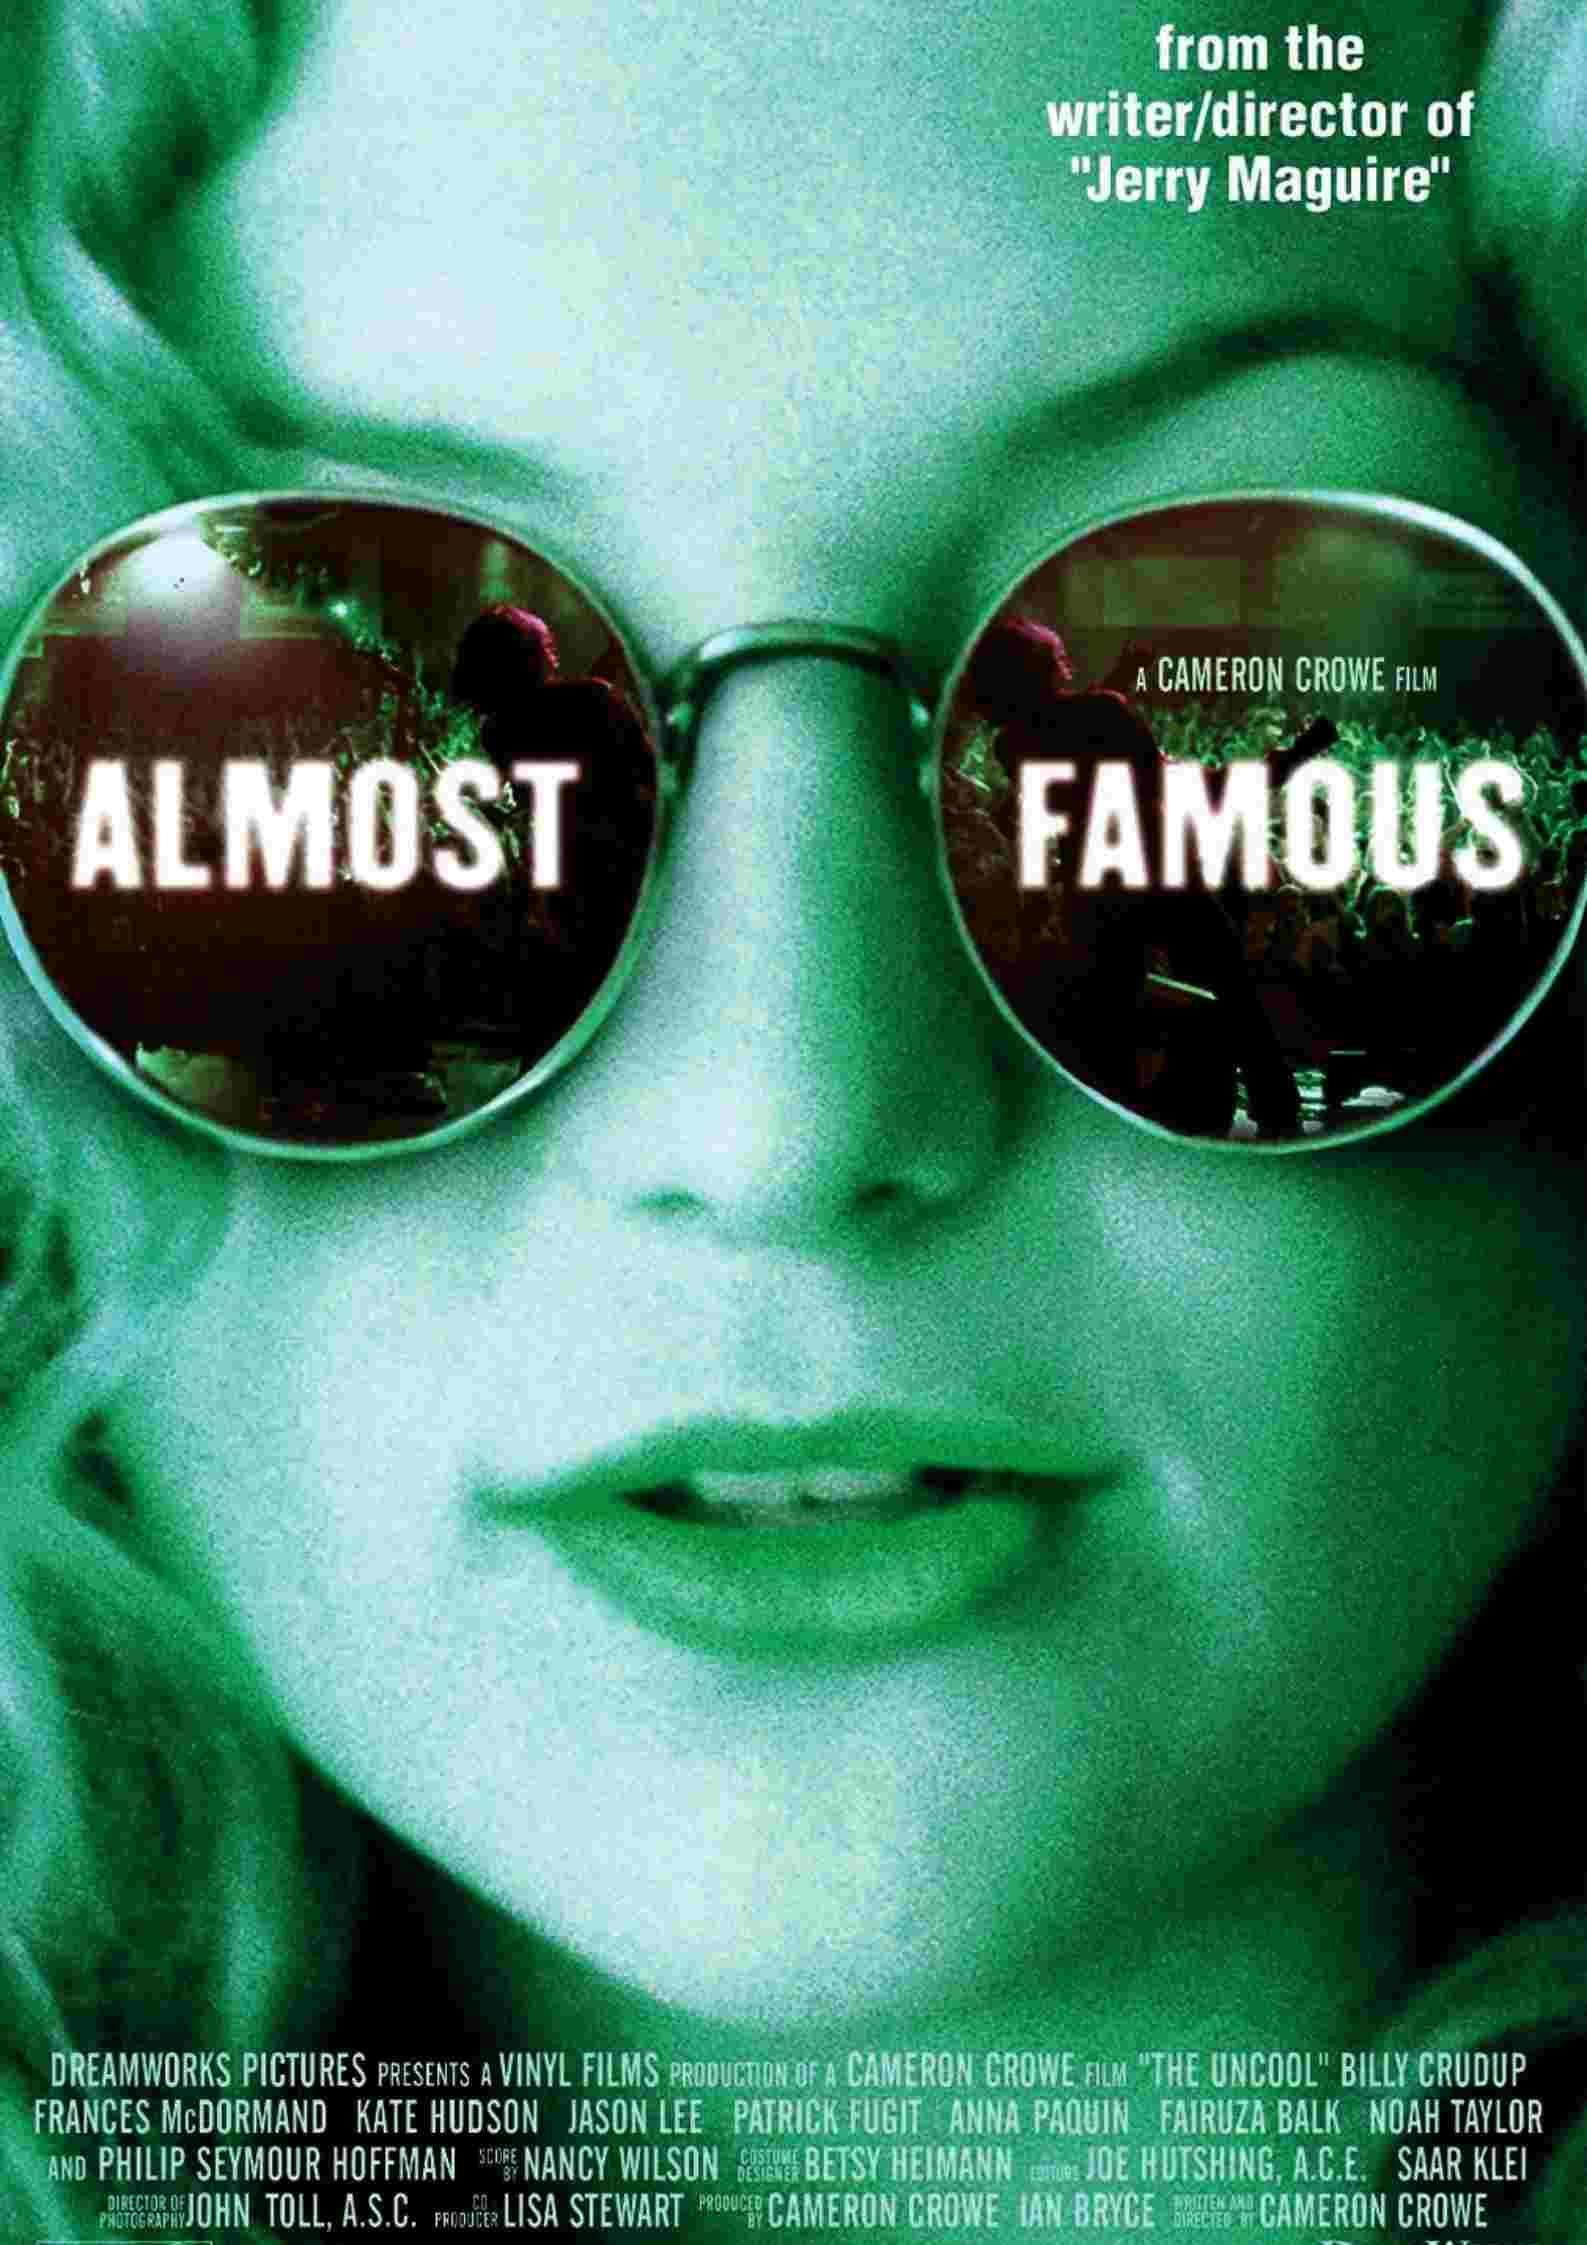 Almost Famous Parents Guide and age rating | 2000 Film